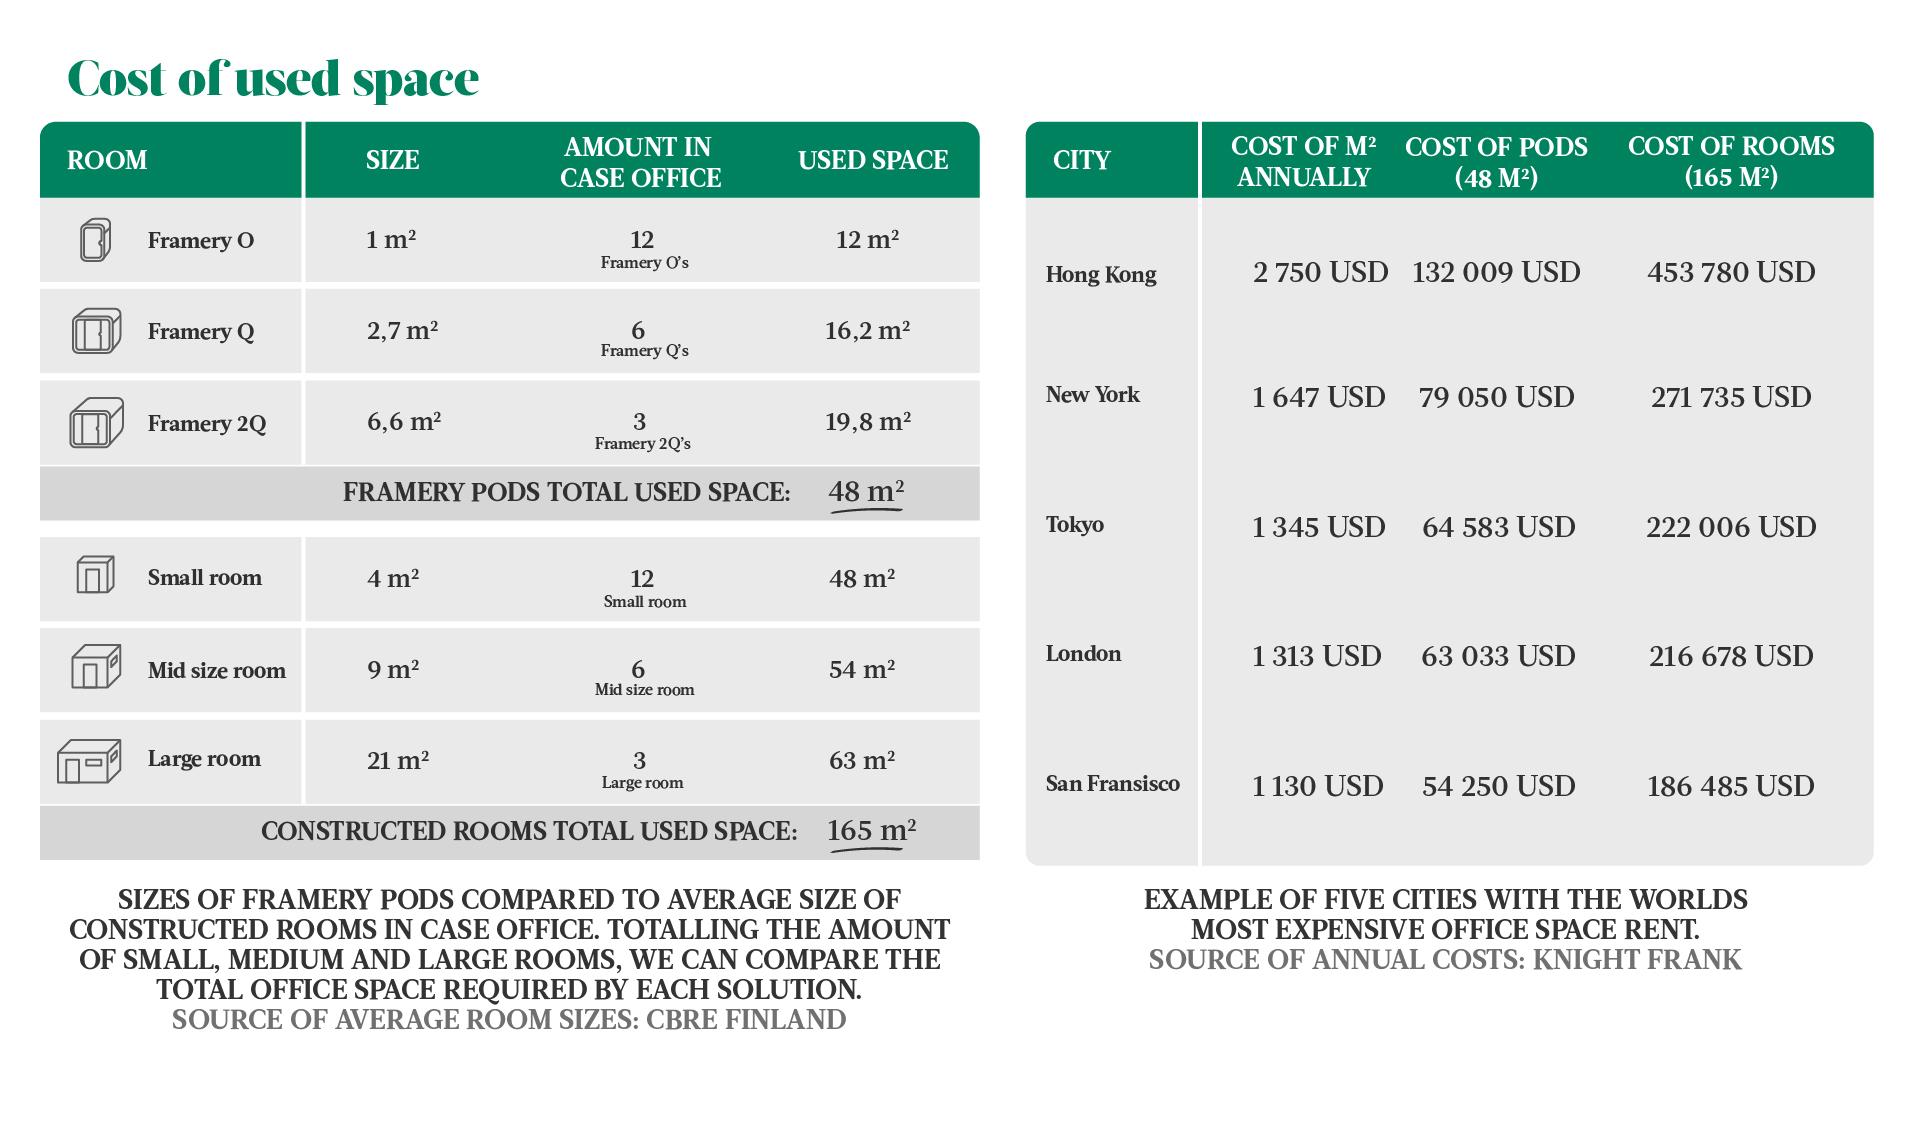 The table compares the cost of the space a constructed room uses versus the space a Framery pod uses